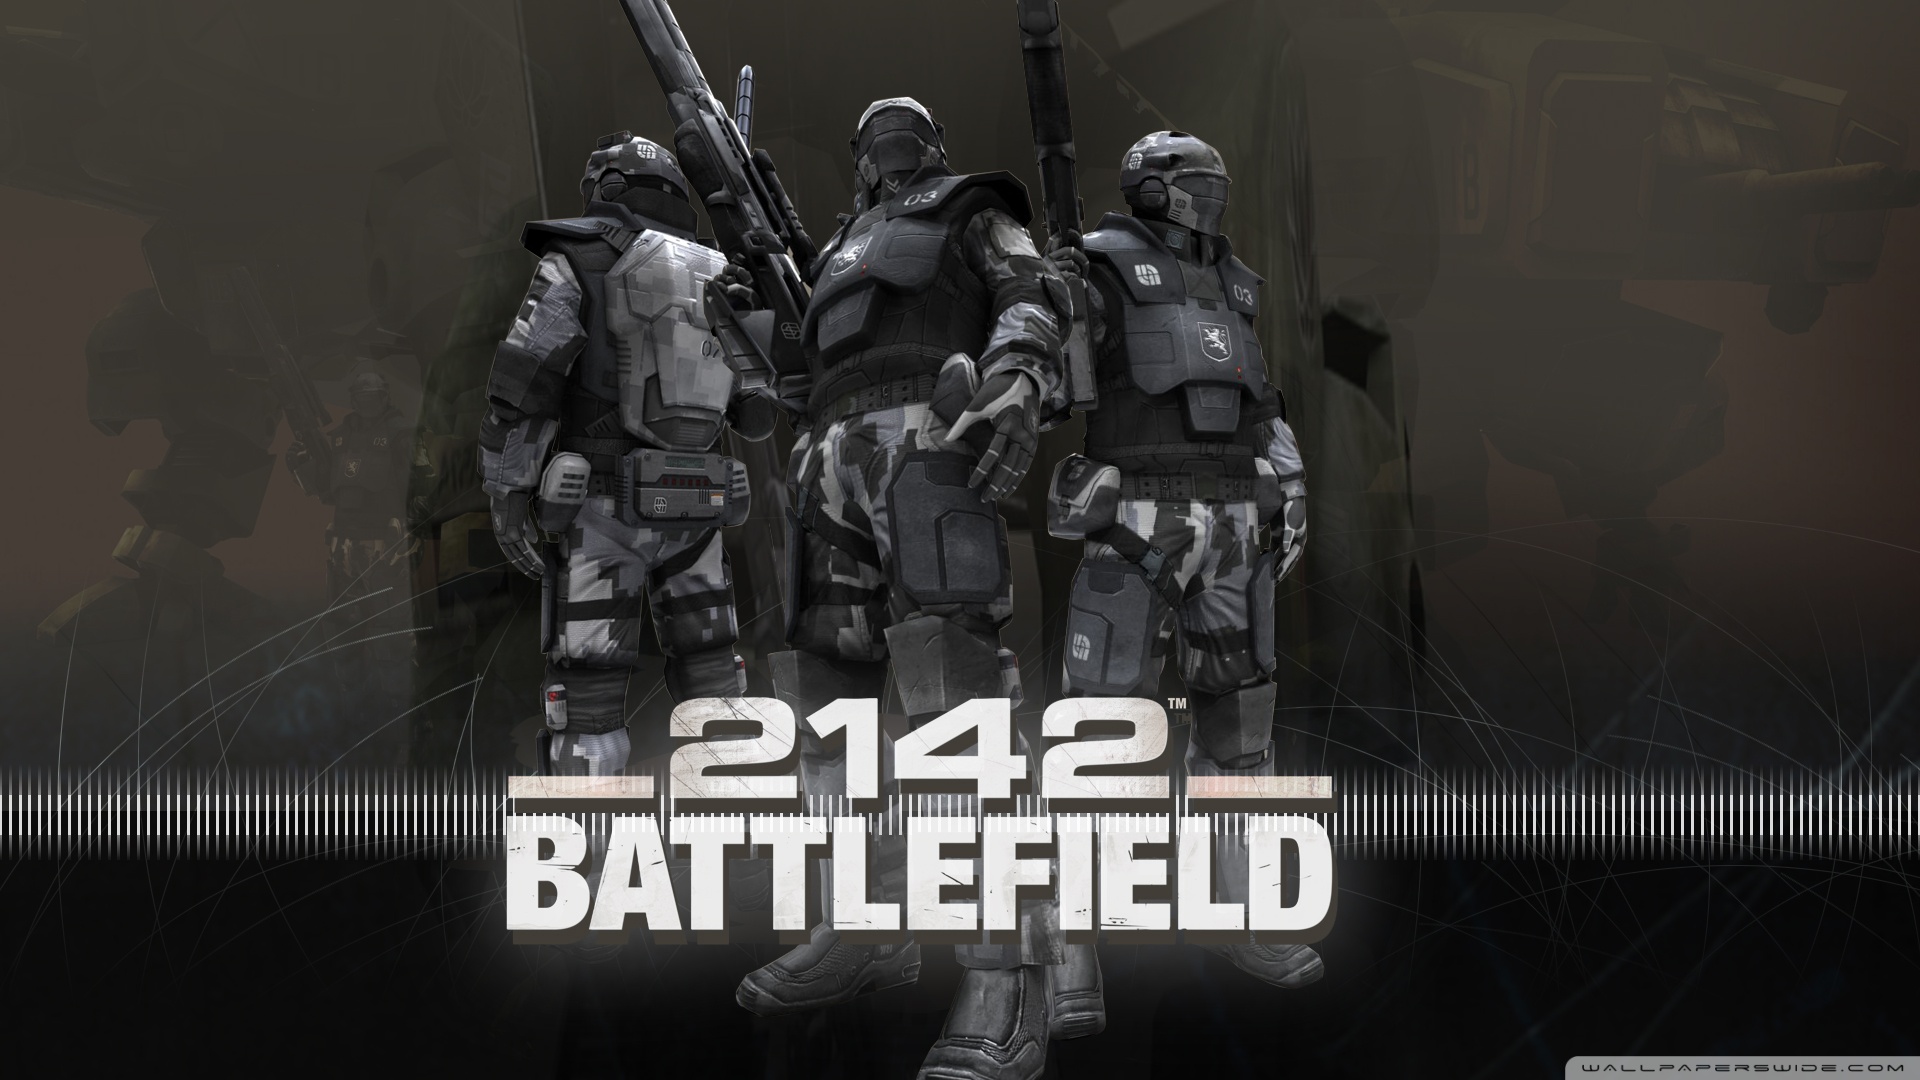 battlefield 2142 wallpapers video game hq battlefield 2142 pictures 4k wallpapers 2019 battlefield 2142 wallpapers video game